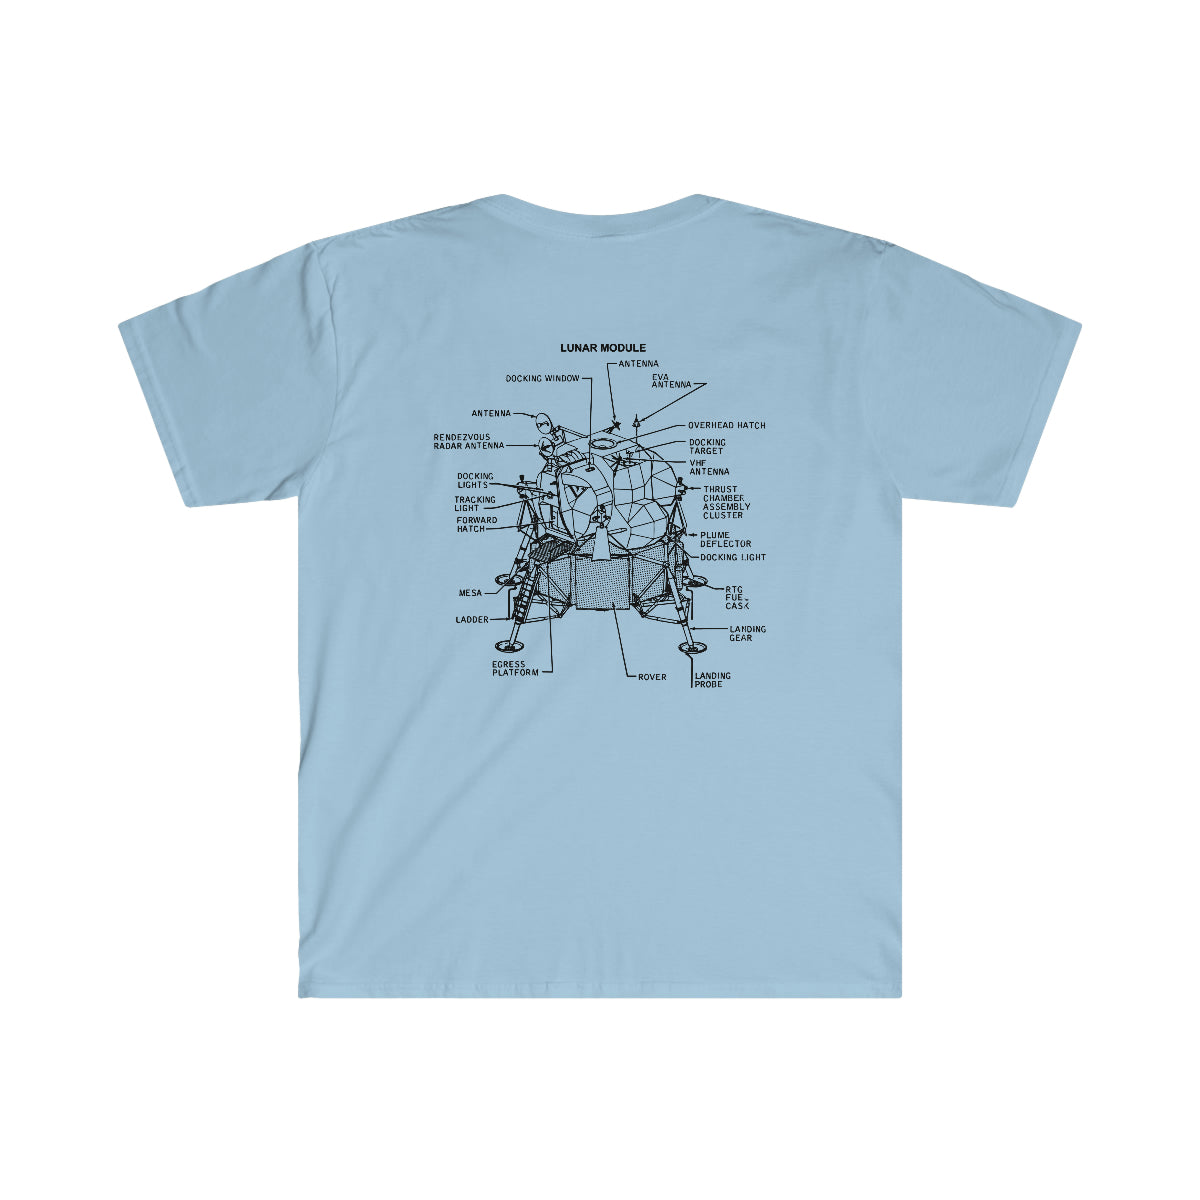 A blue Moon Landing T-Shirt featuring a spacecraft diagram - perfect for moon landing enthusiasts and astronauts.